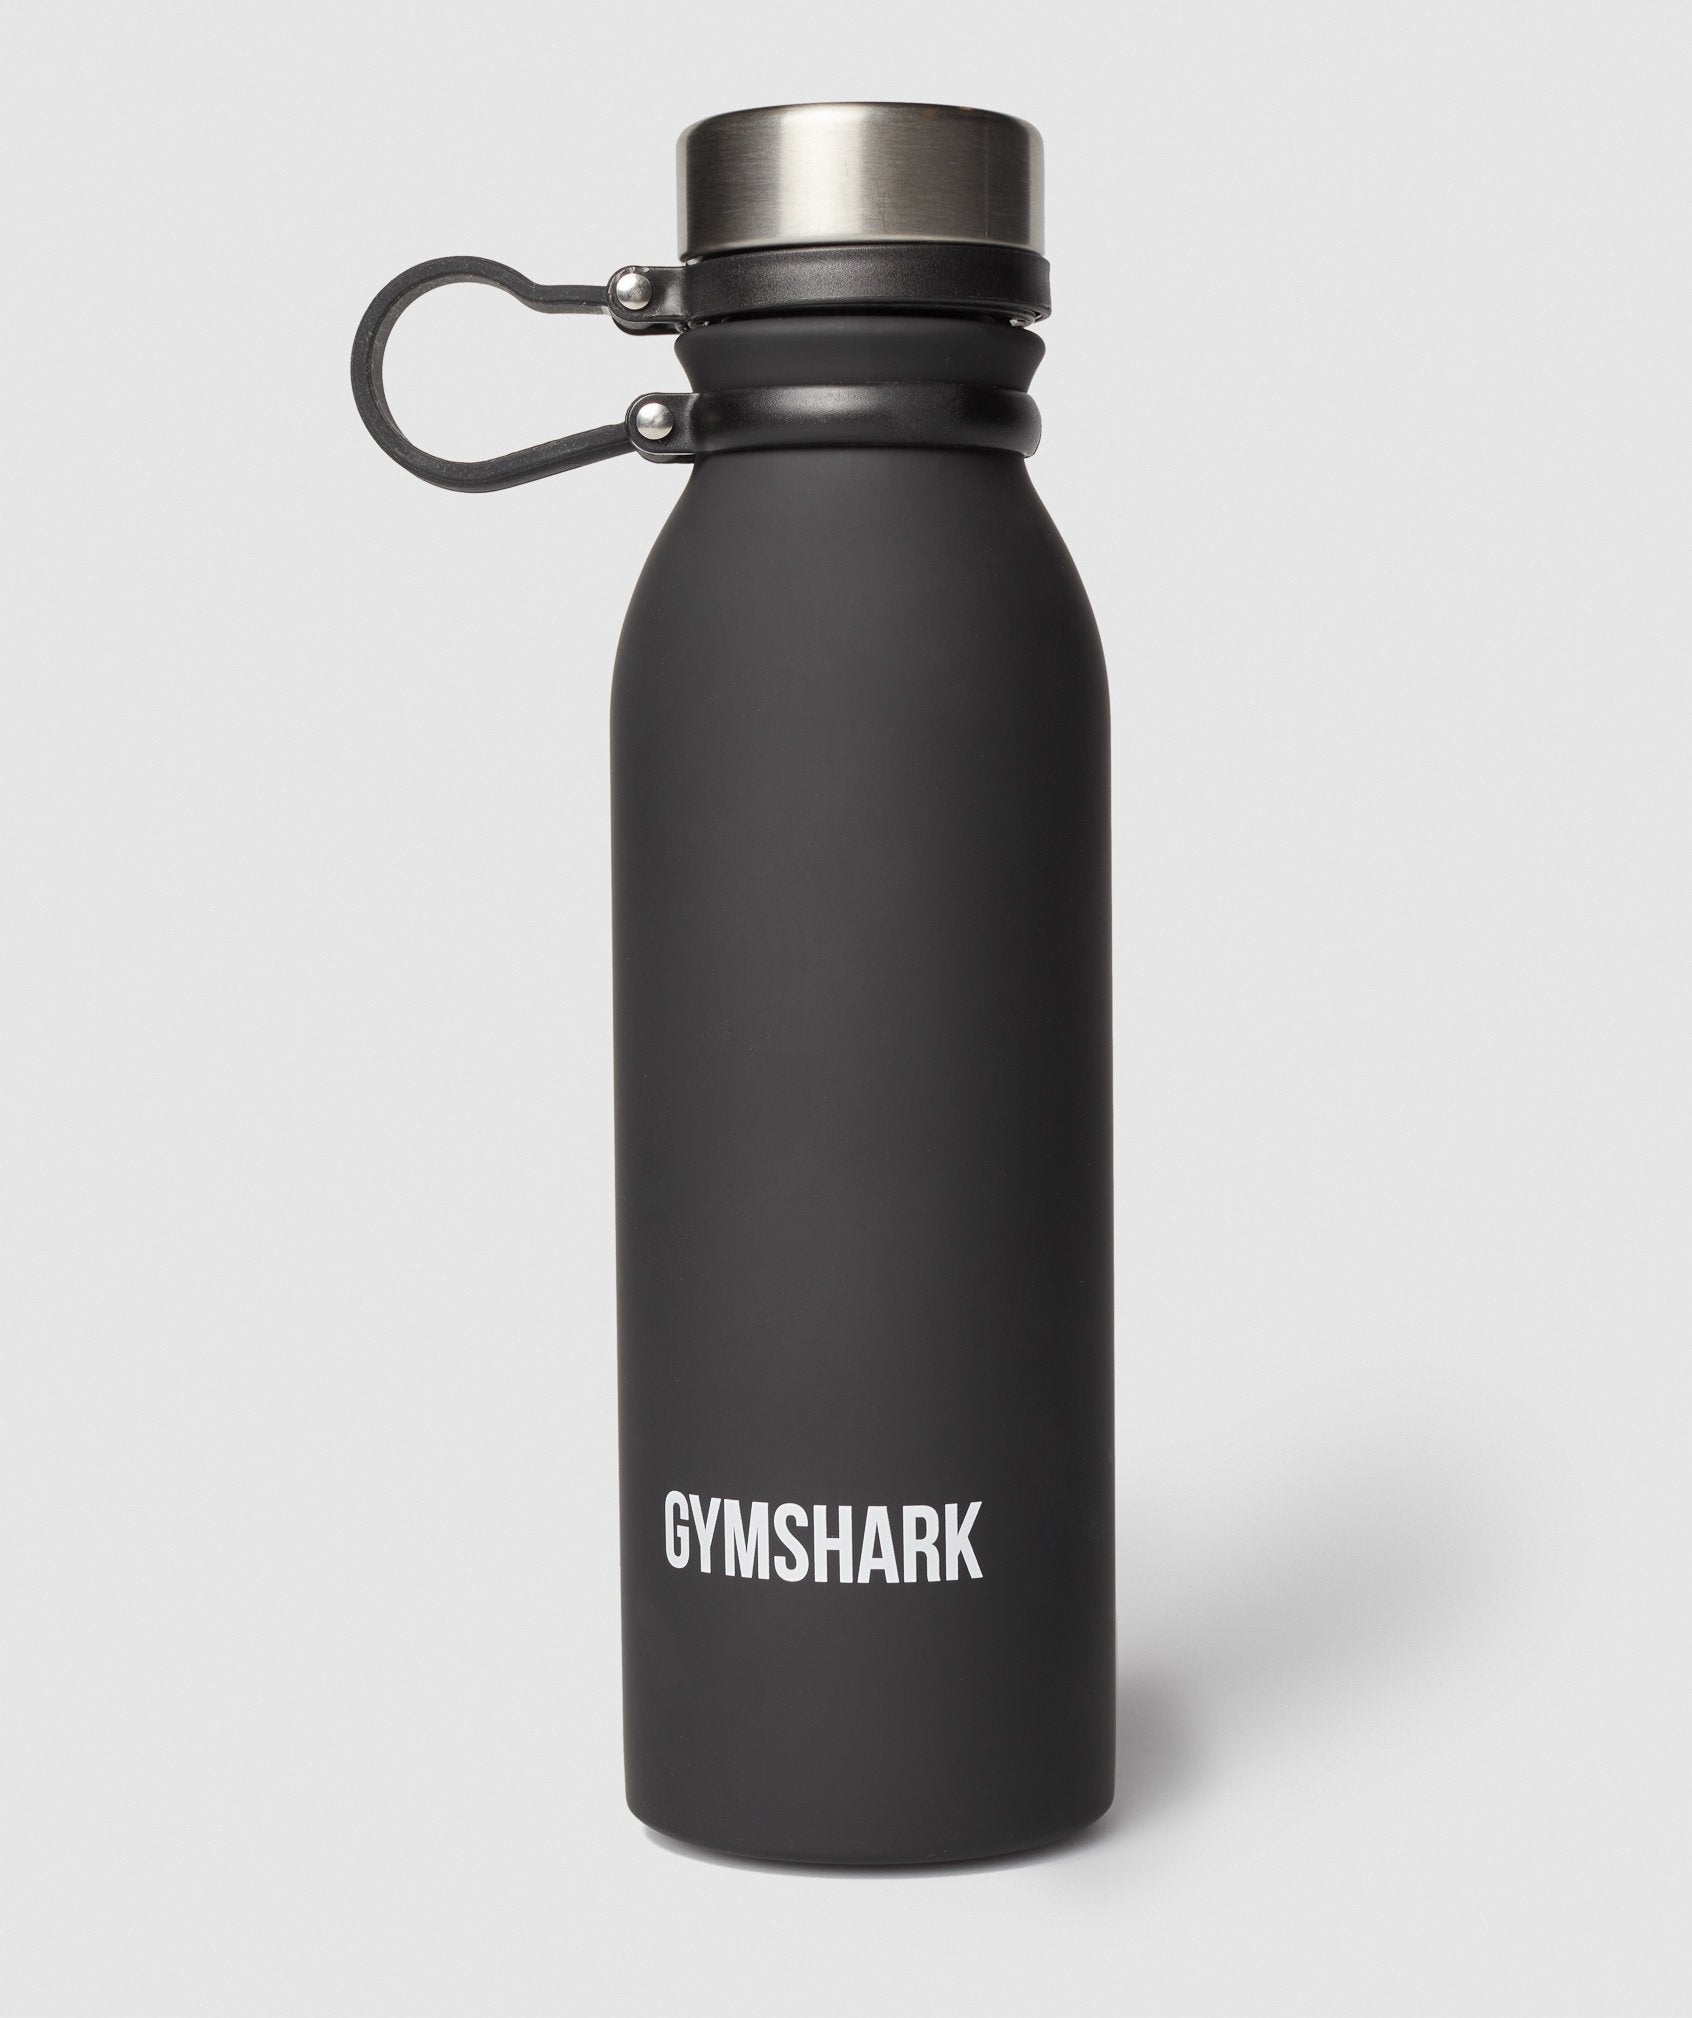 Hot/Cold Bottle in {{variantColor} is out of stock